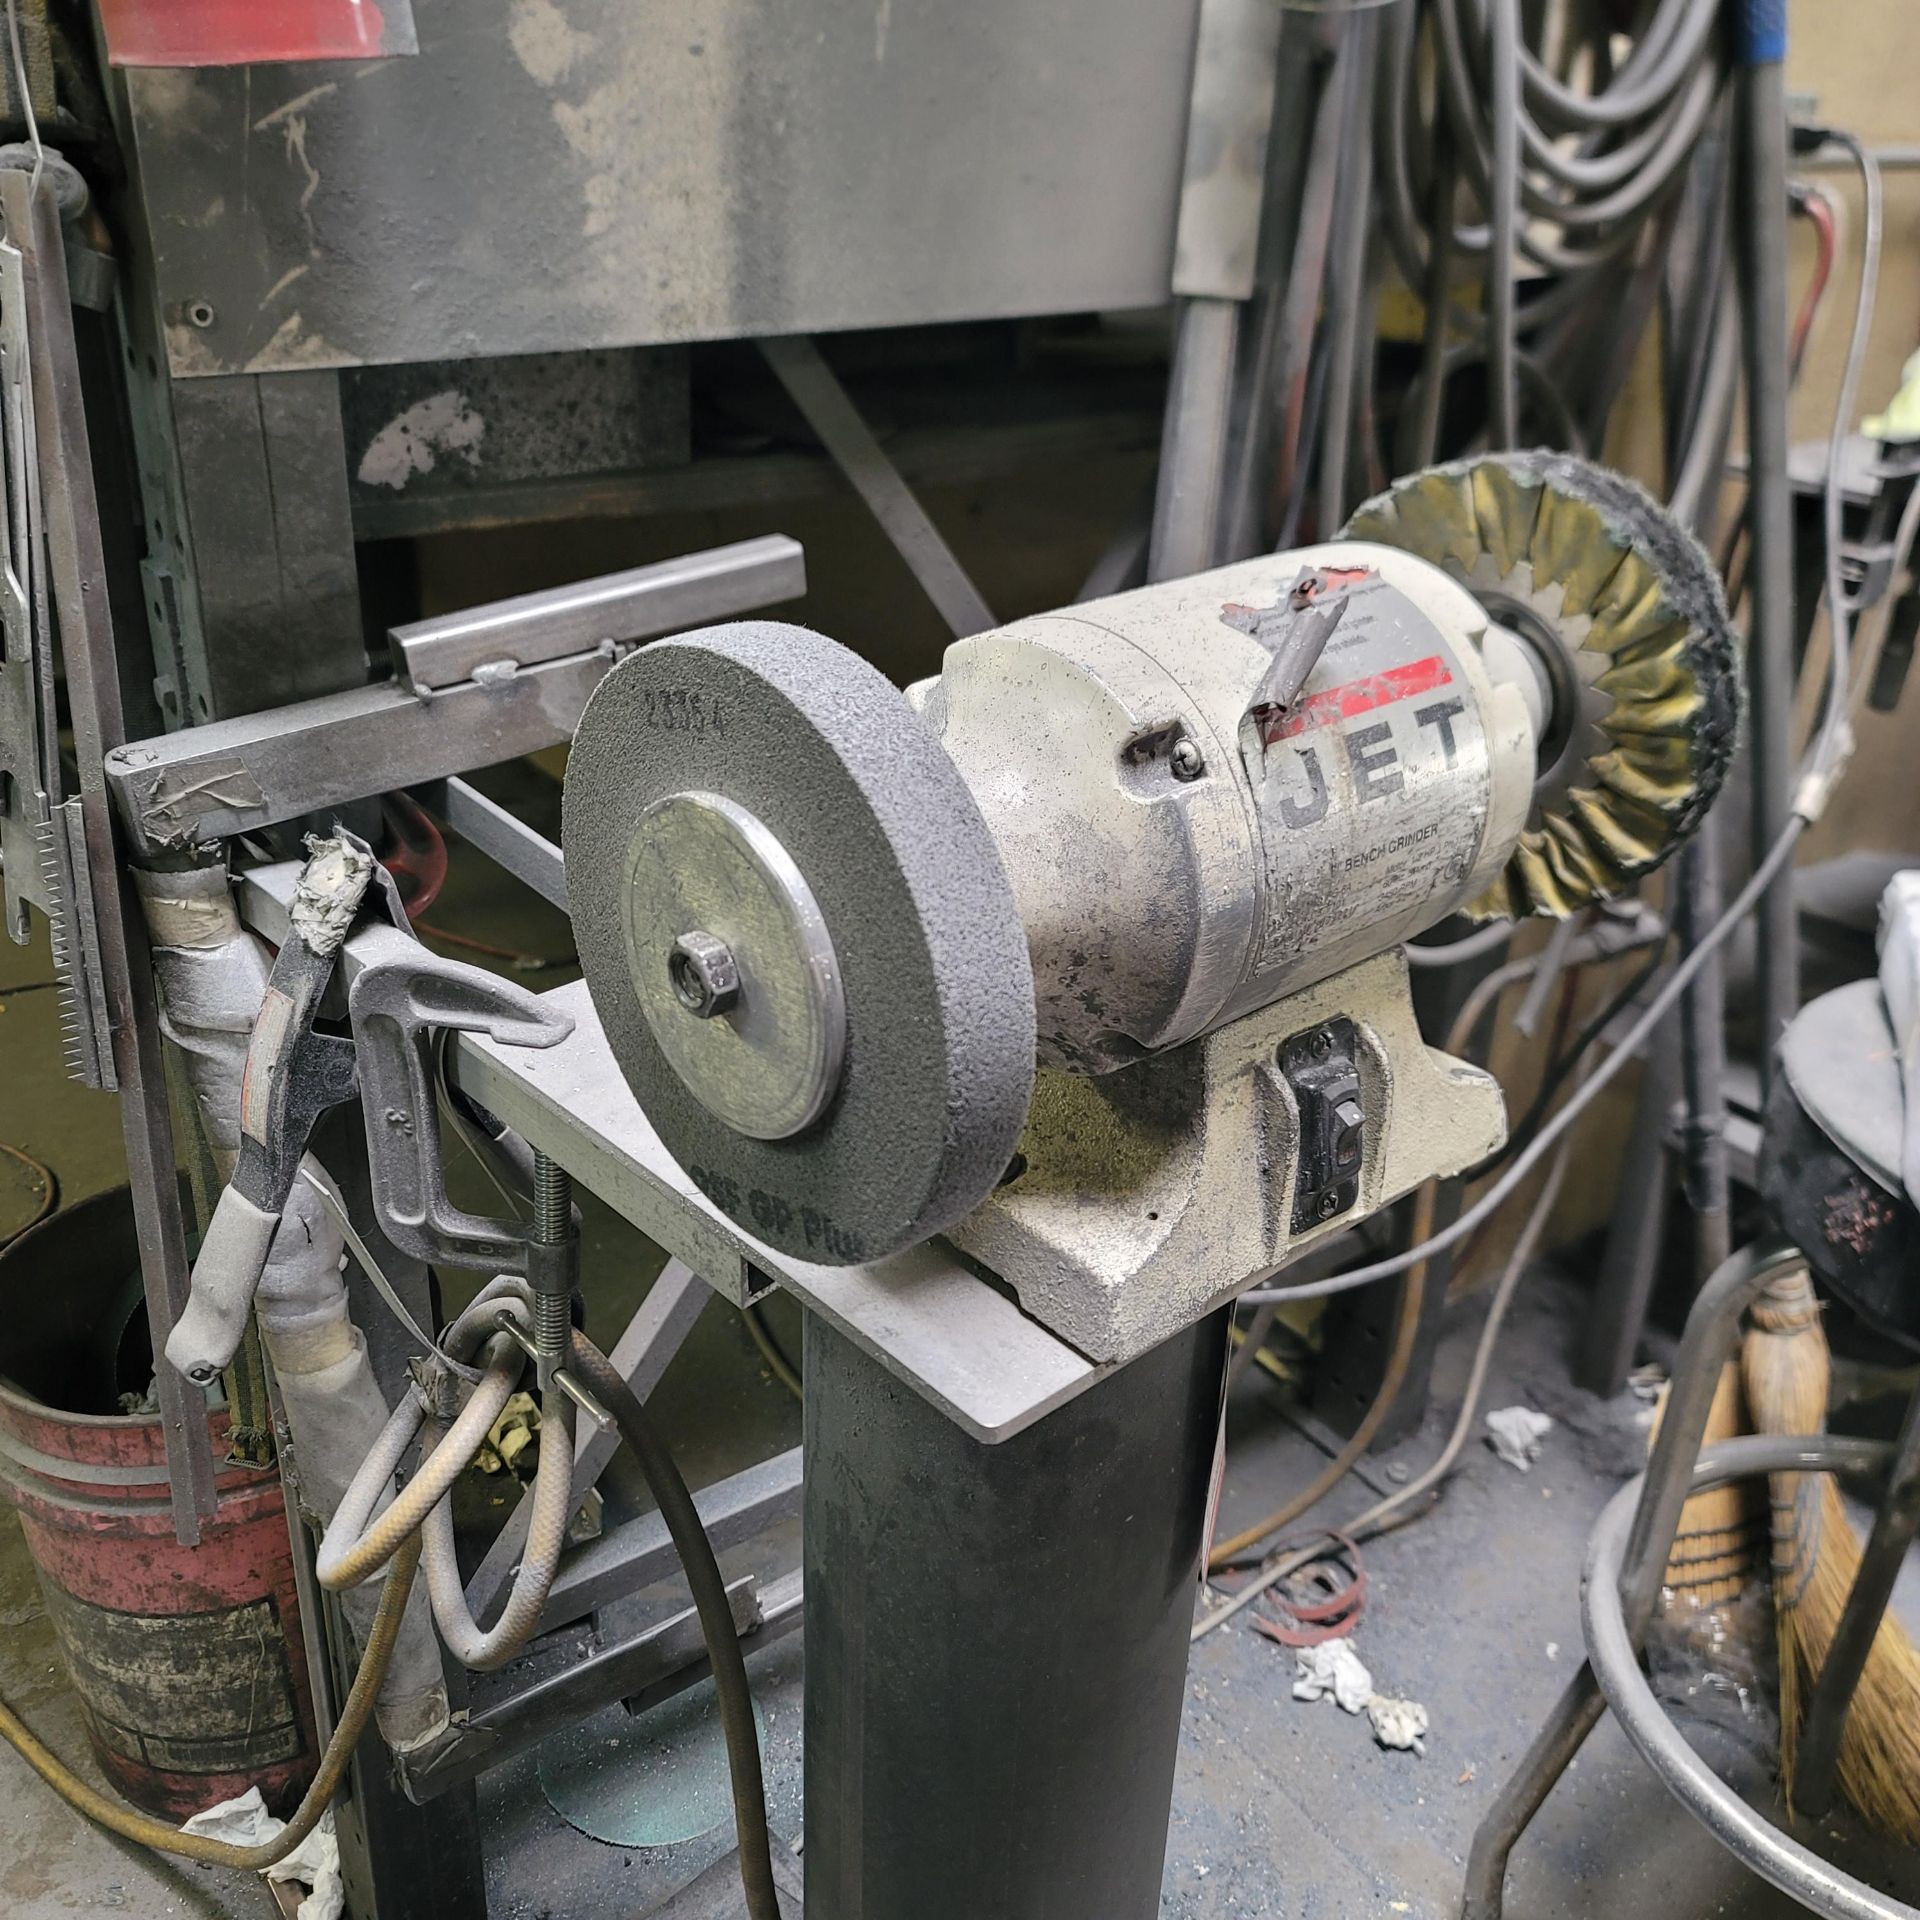 JET 6" DOUBLE END GRINDER, 1/2 HP, W/ STAND - Image 3 of 3